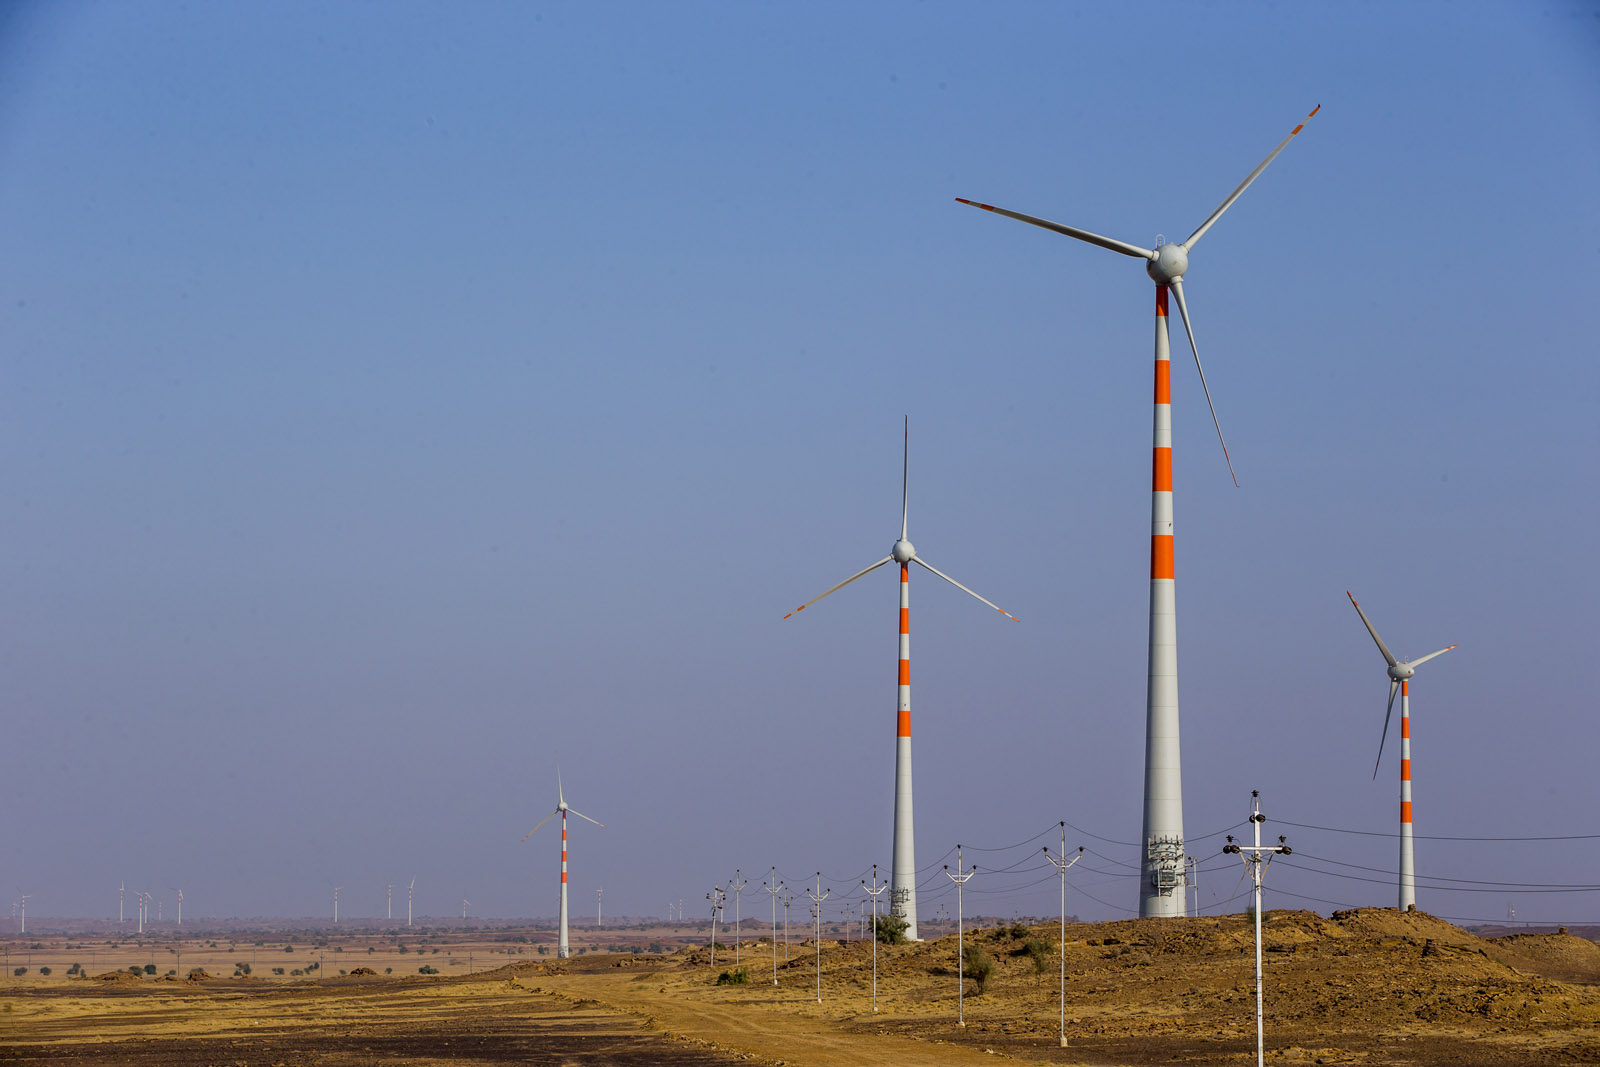 Apraava Energy is a leading wind power developer in the country